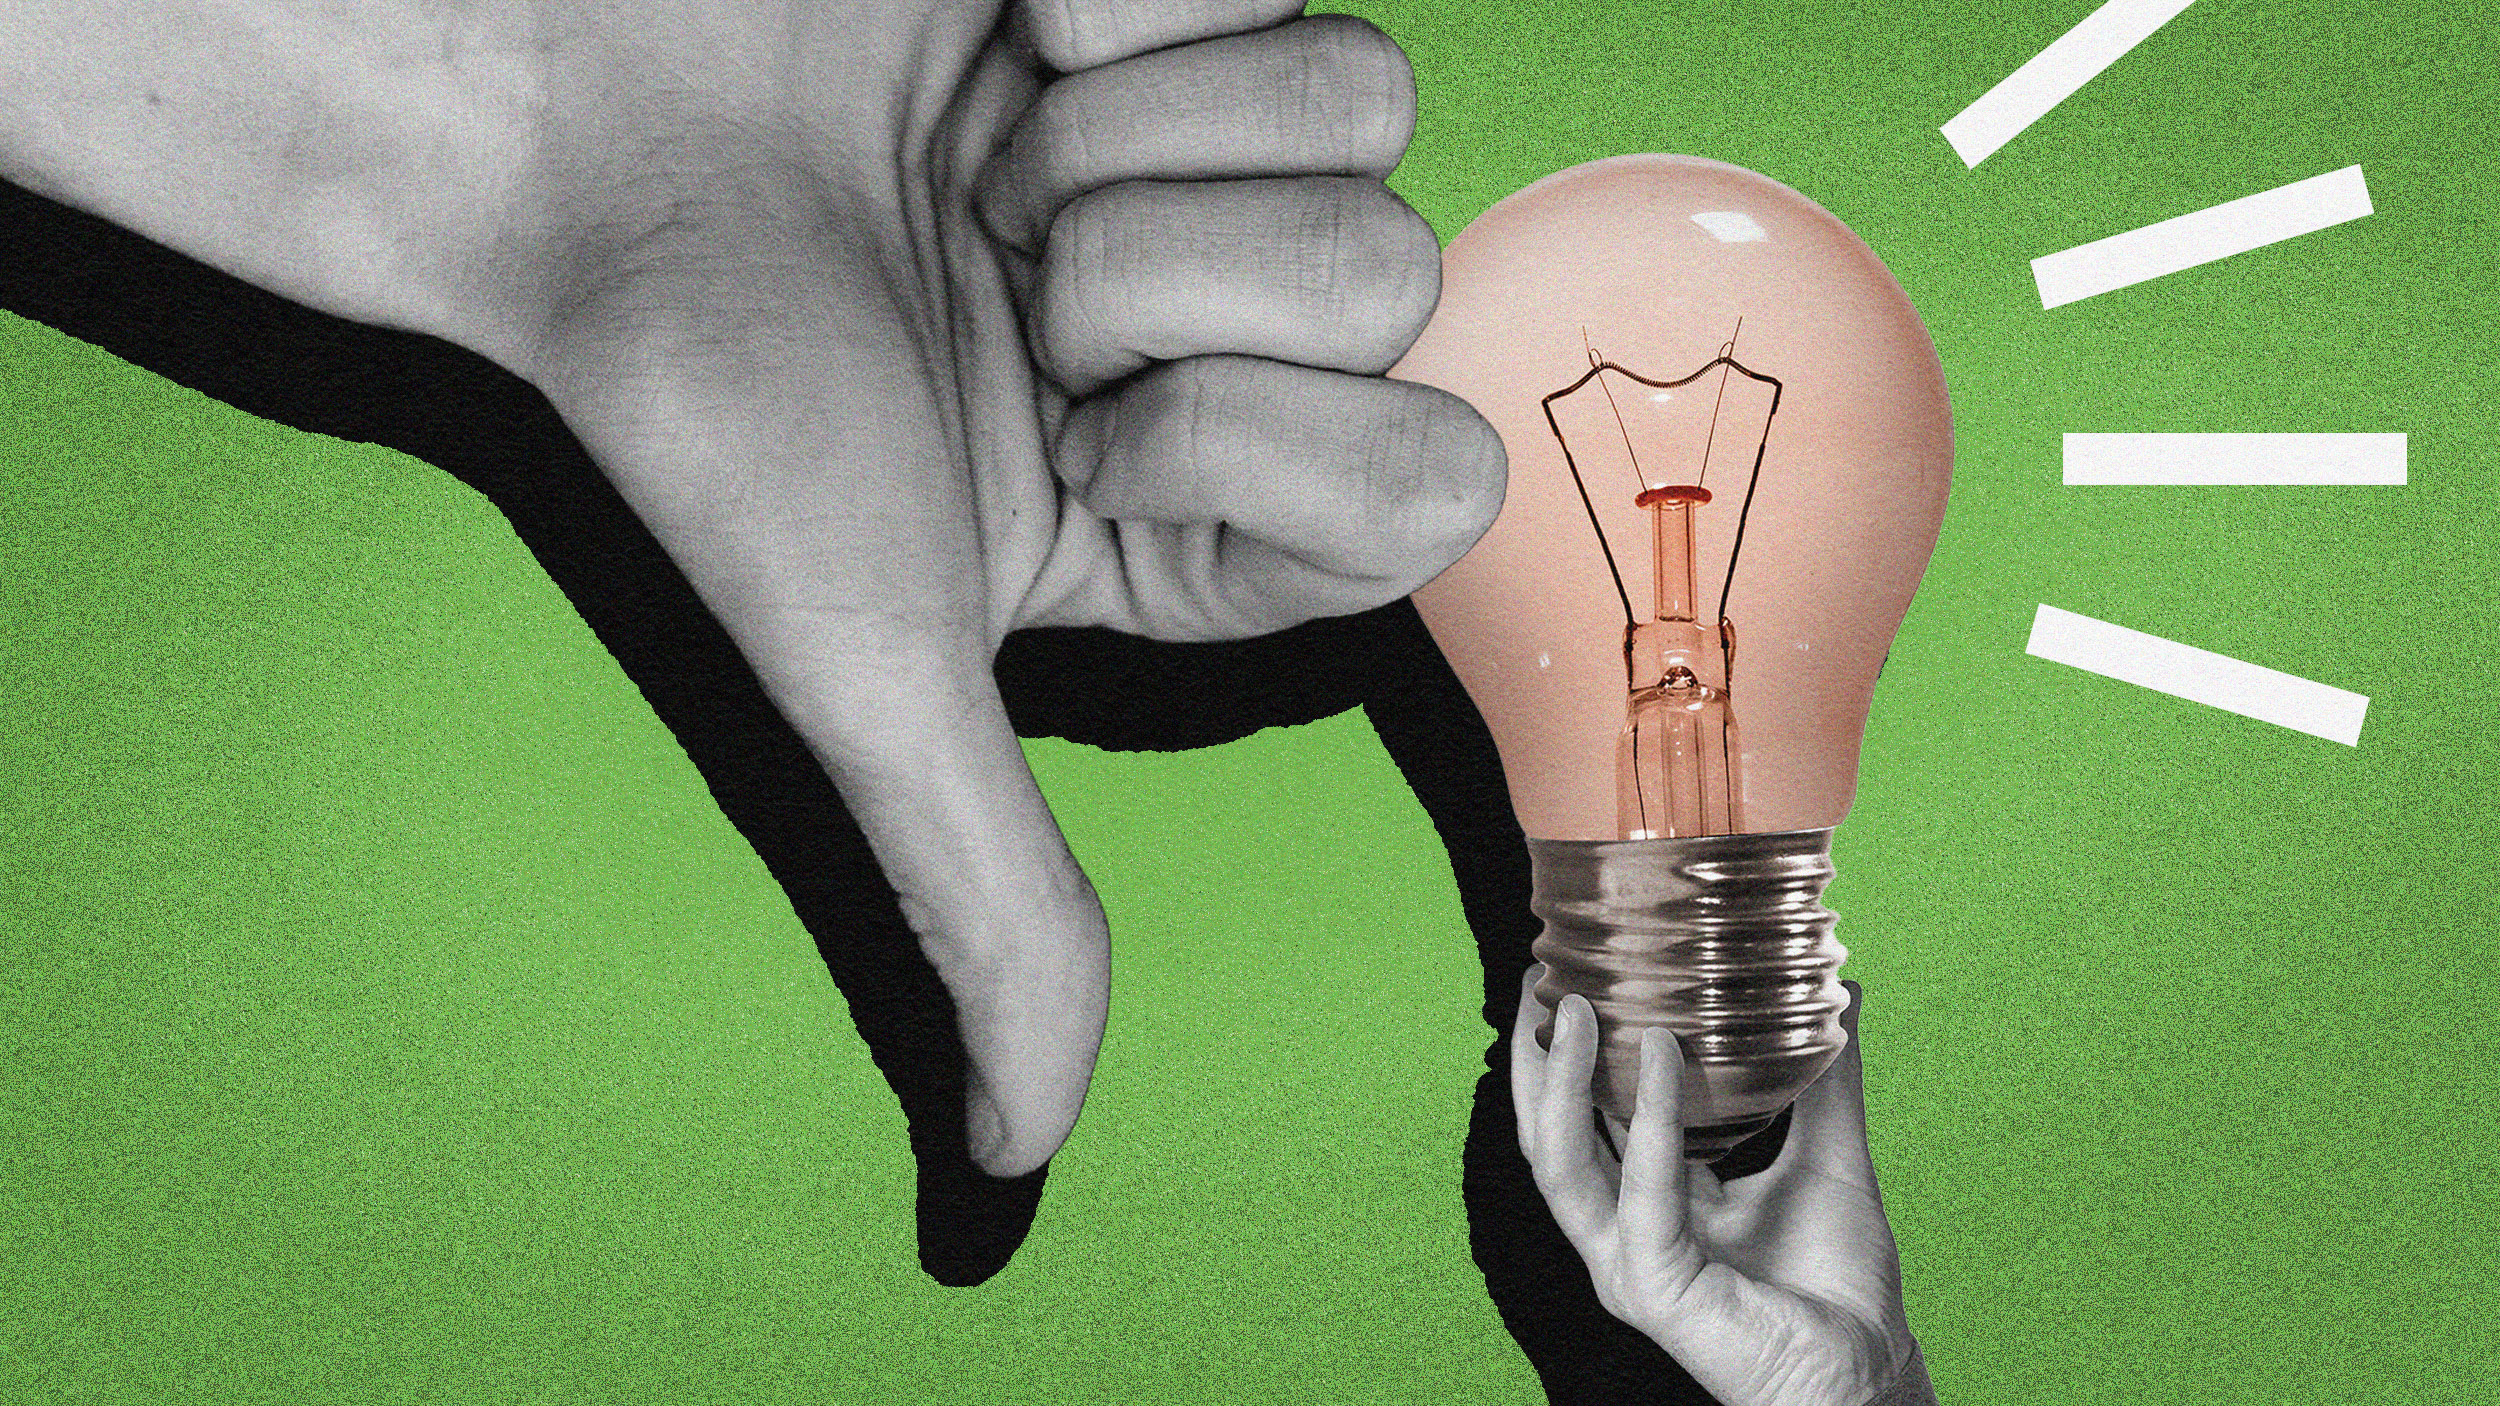 A hand holding a light bulb with a thumbs down, symbolizing a rejection of new ideas.